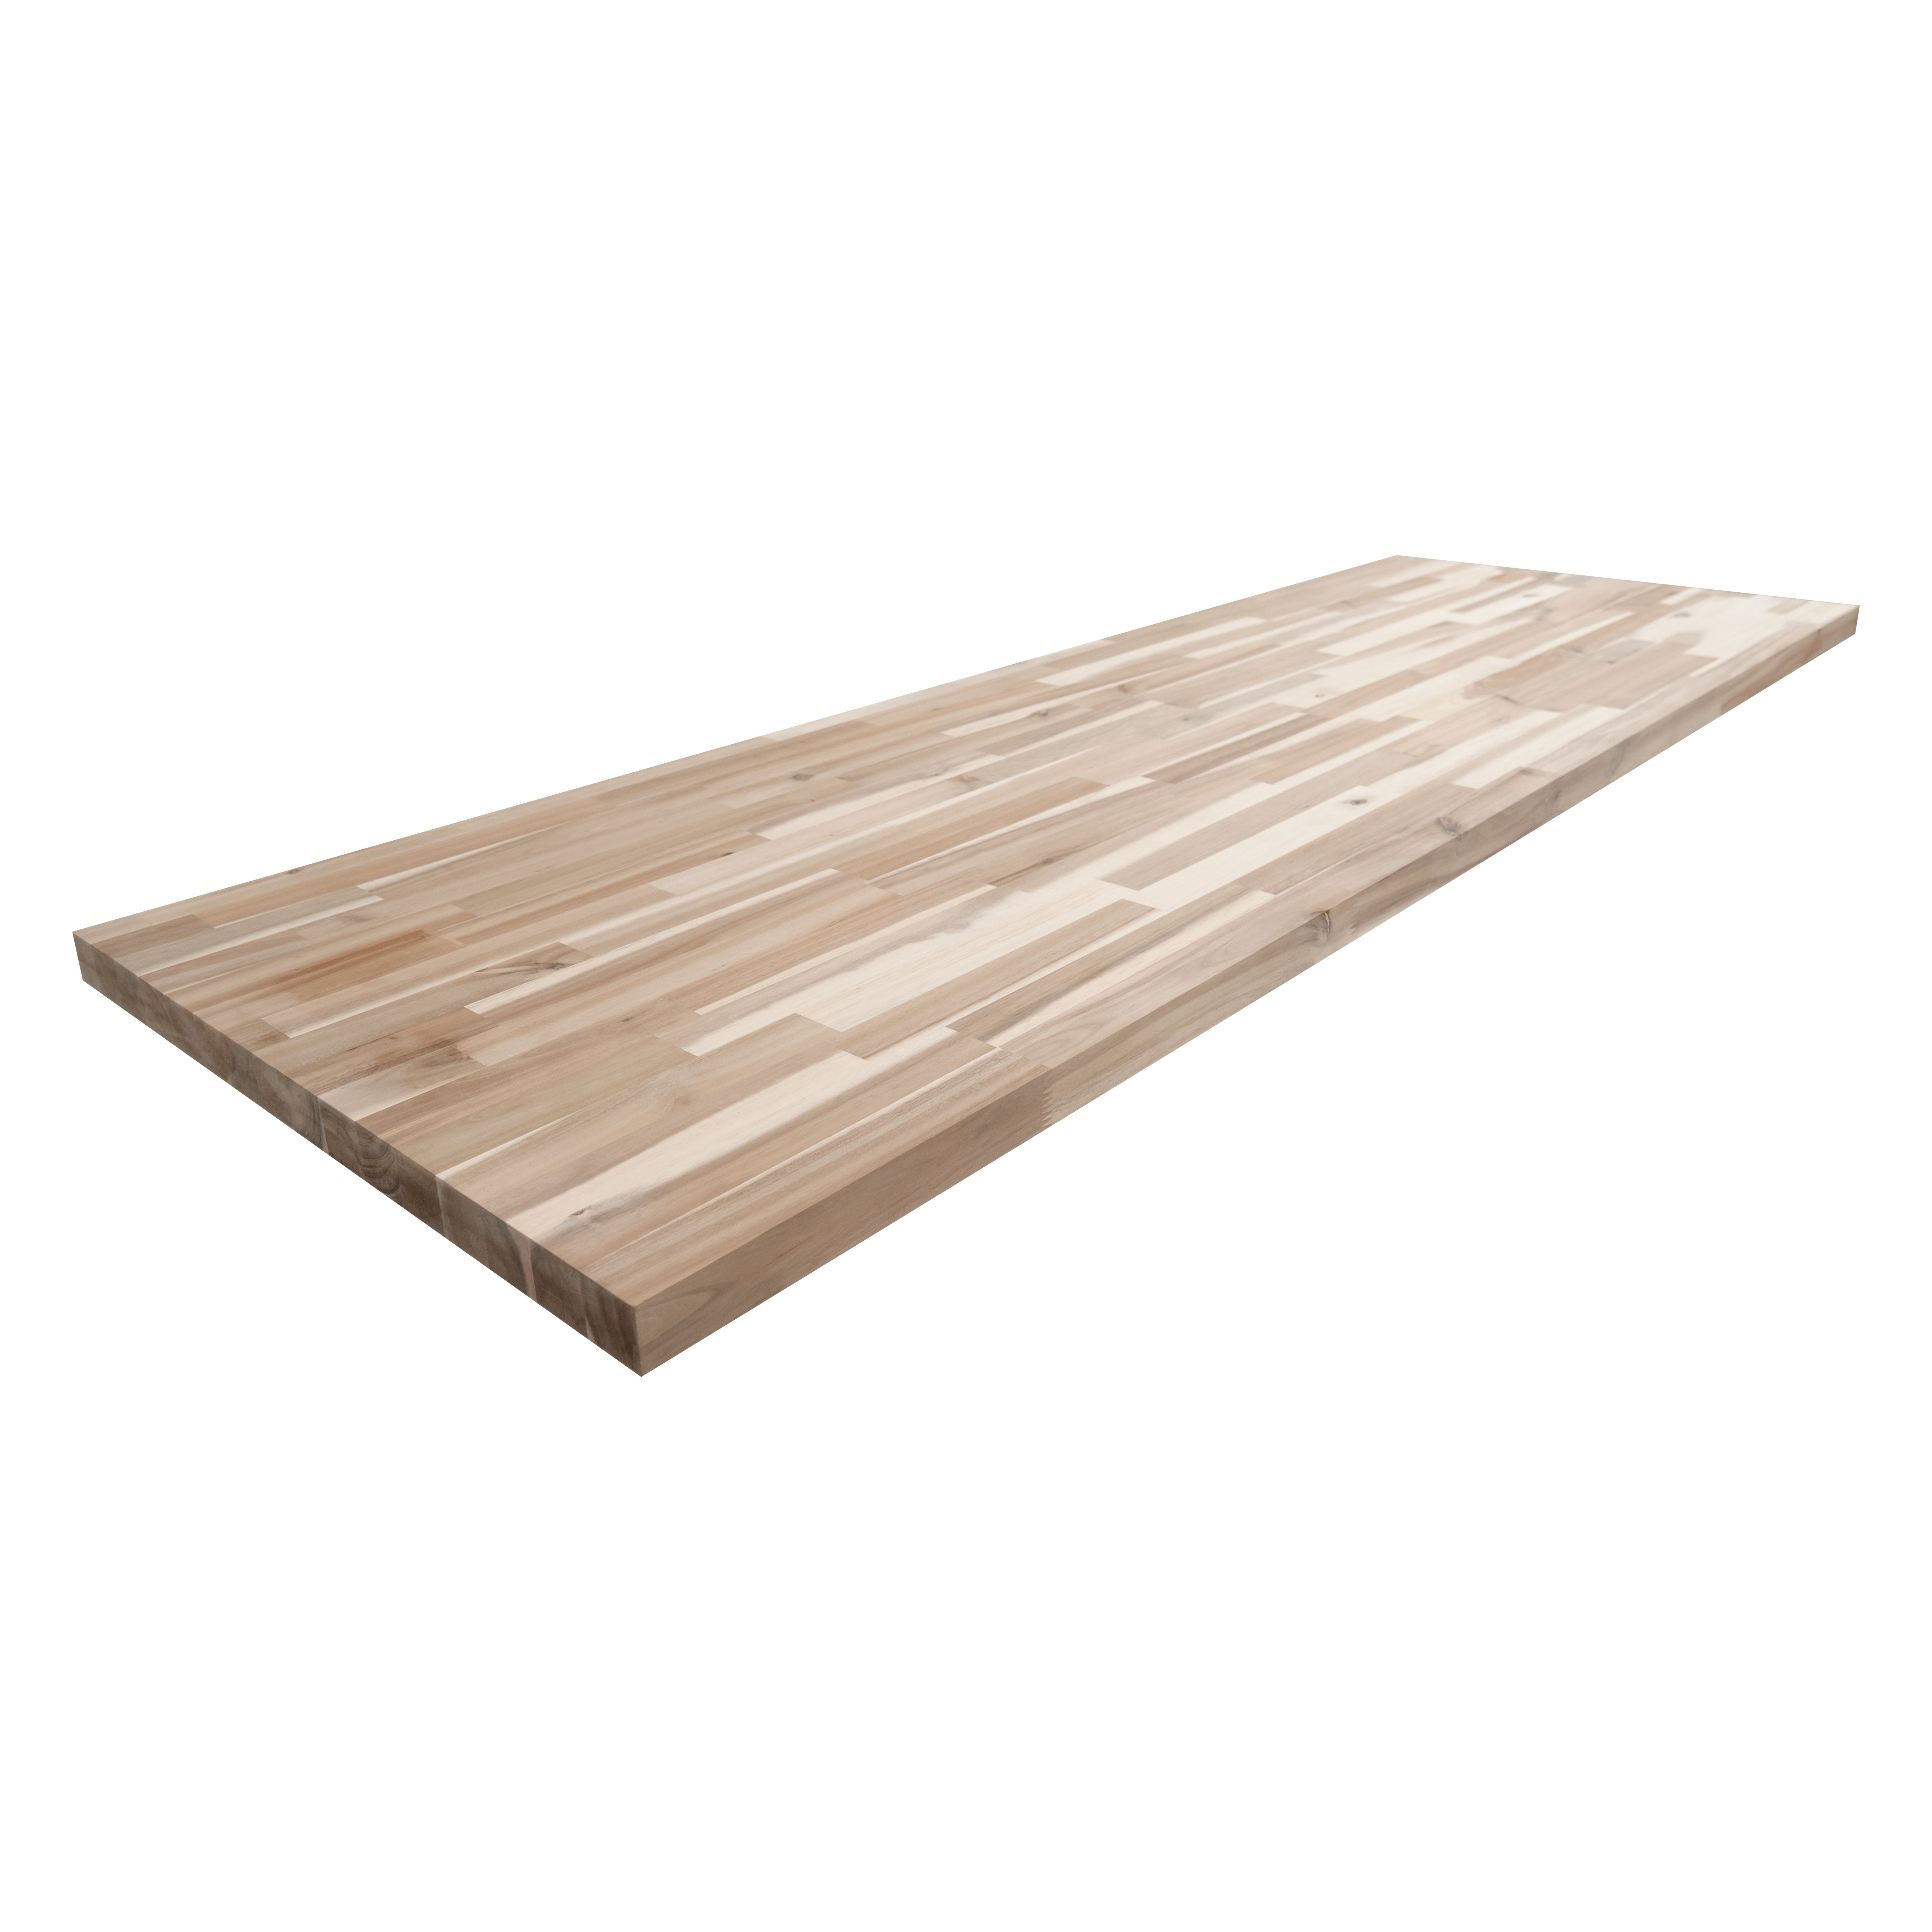 6 ft. L x 25 in. D Unfinished Birch Solid Wood Butcher Block Countertop  With Eased Edge